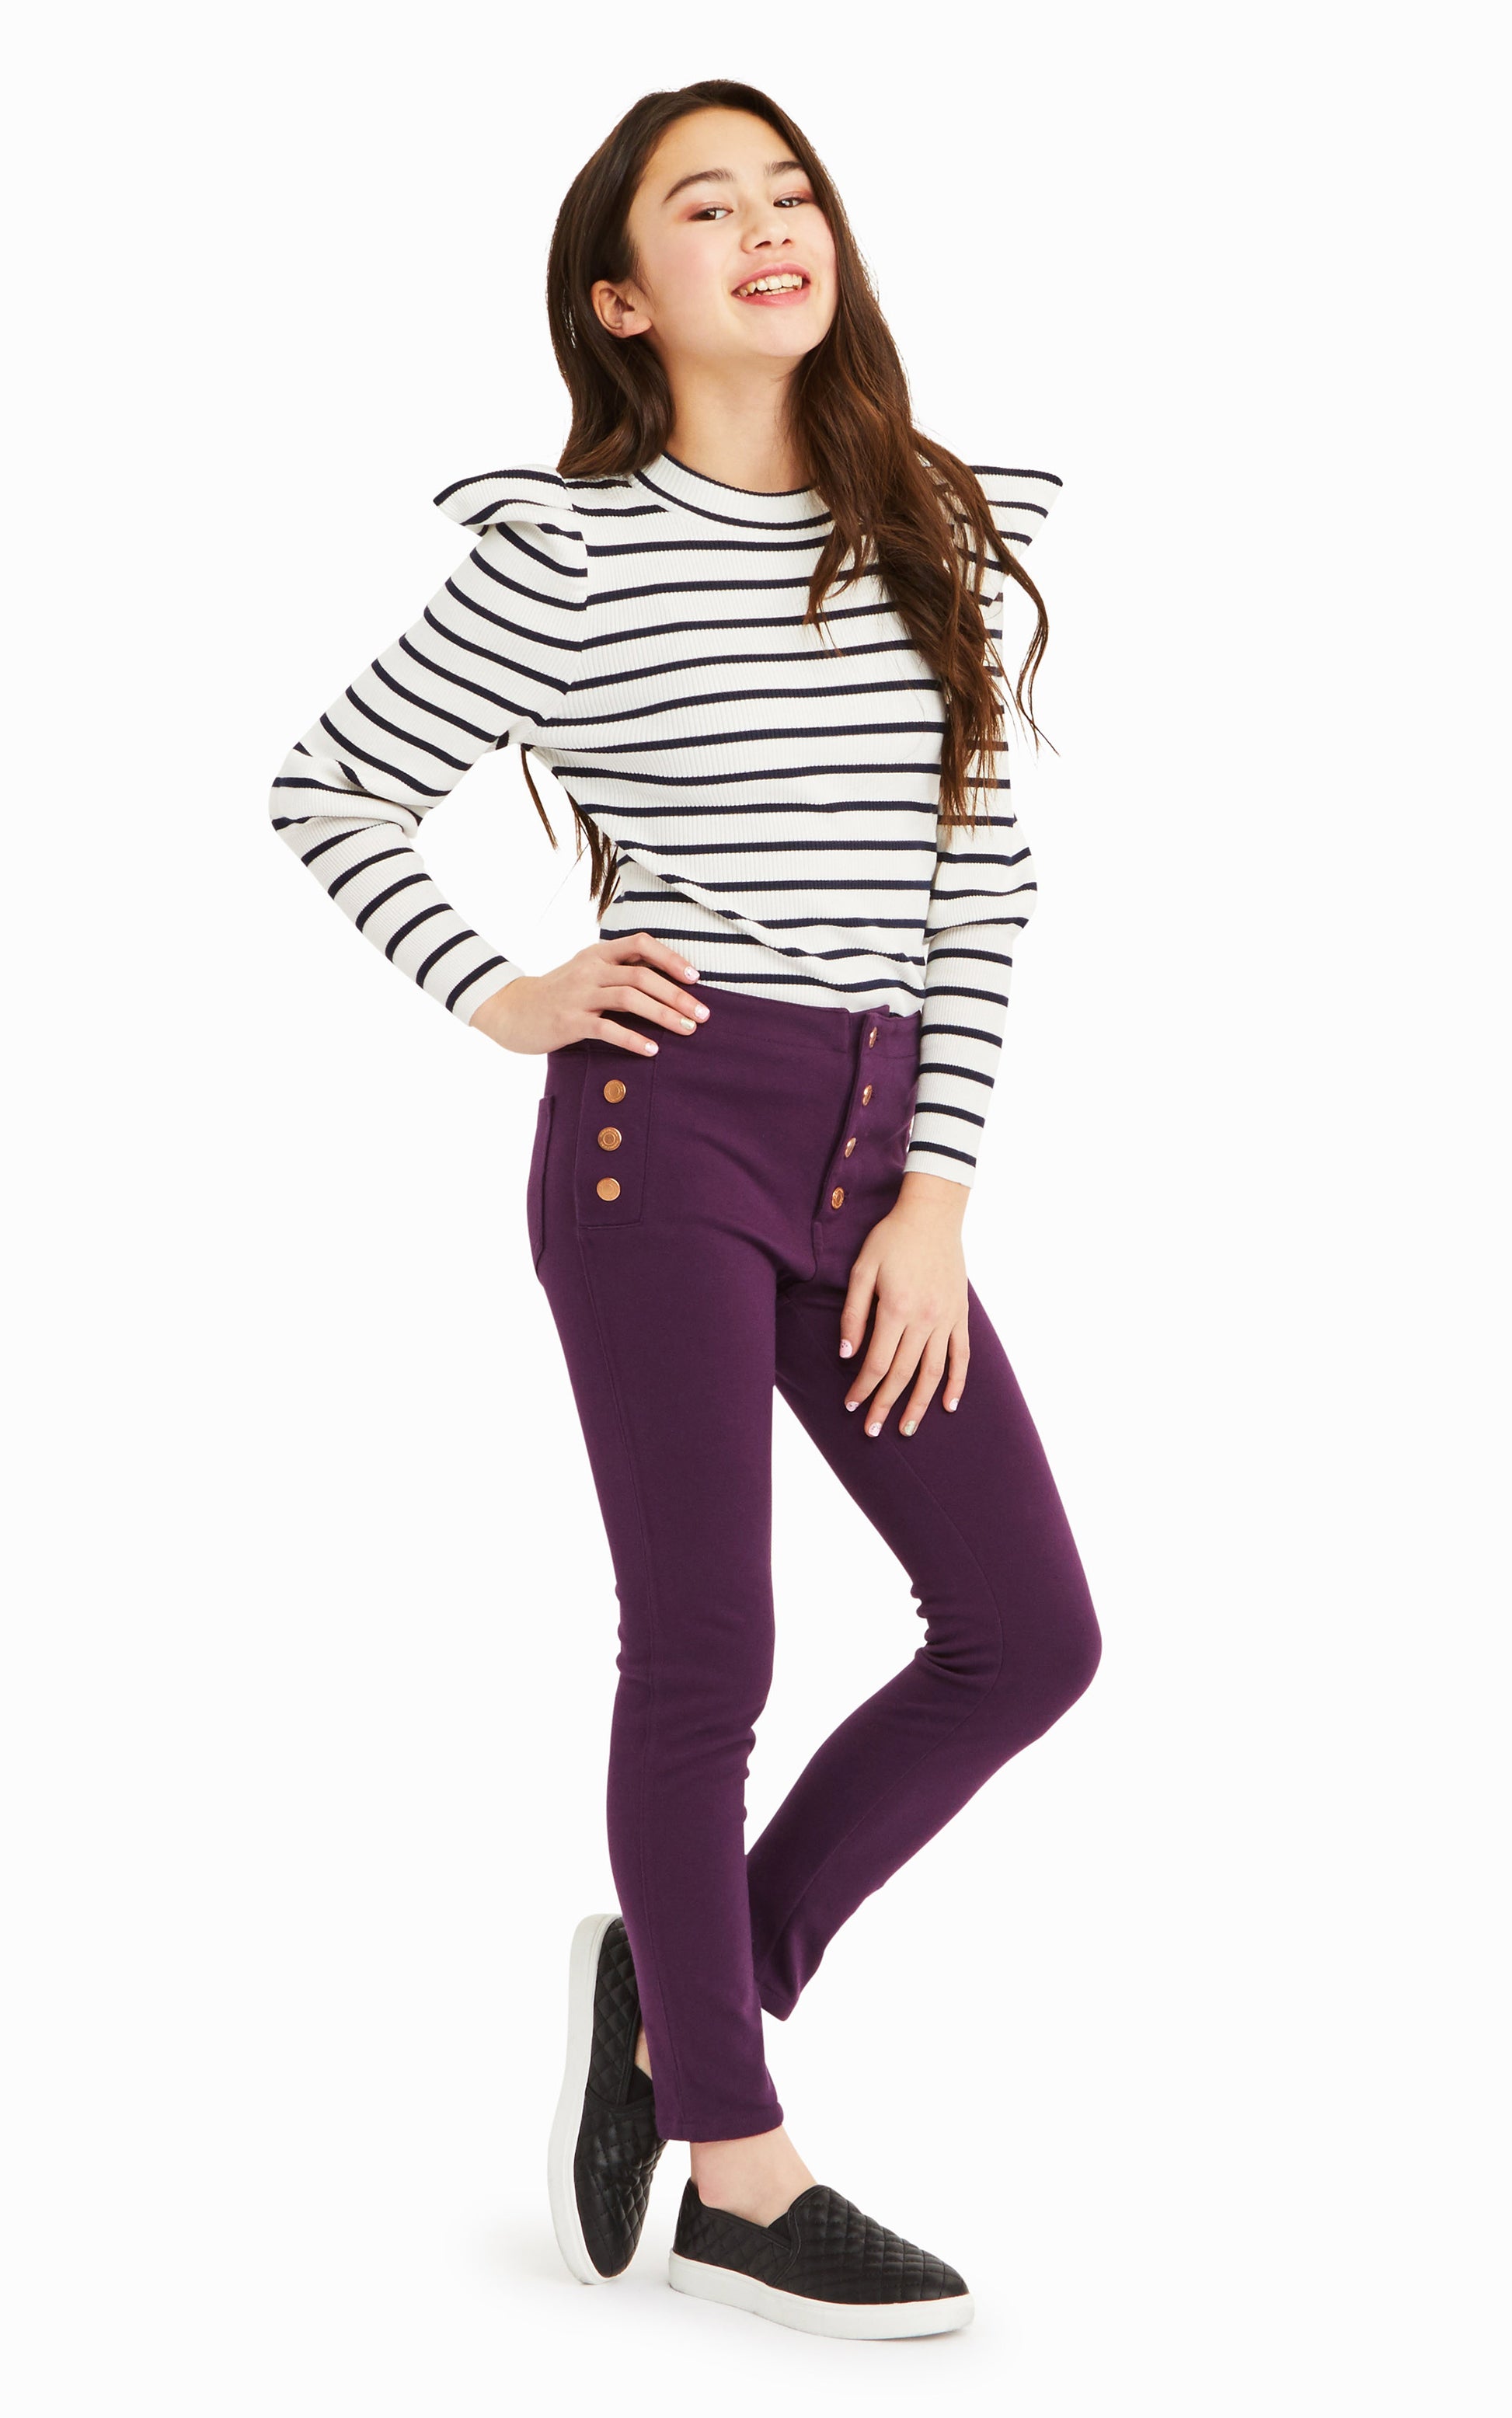 Side view of girl wearing white and black-striped long-sleeve top with purple snap-front pants.